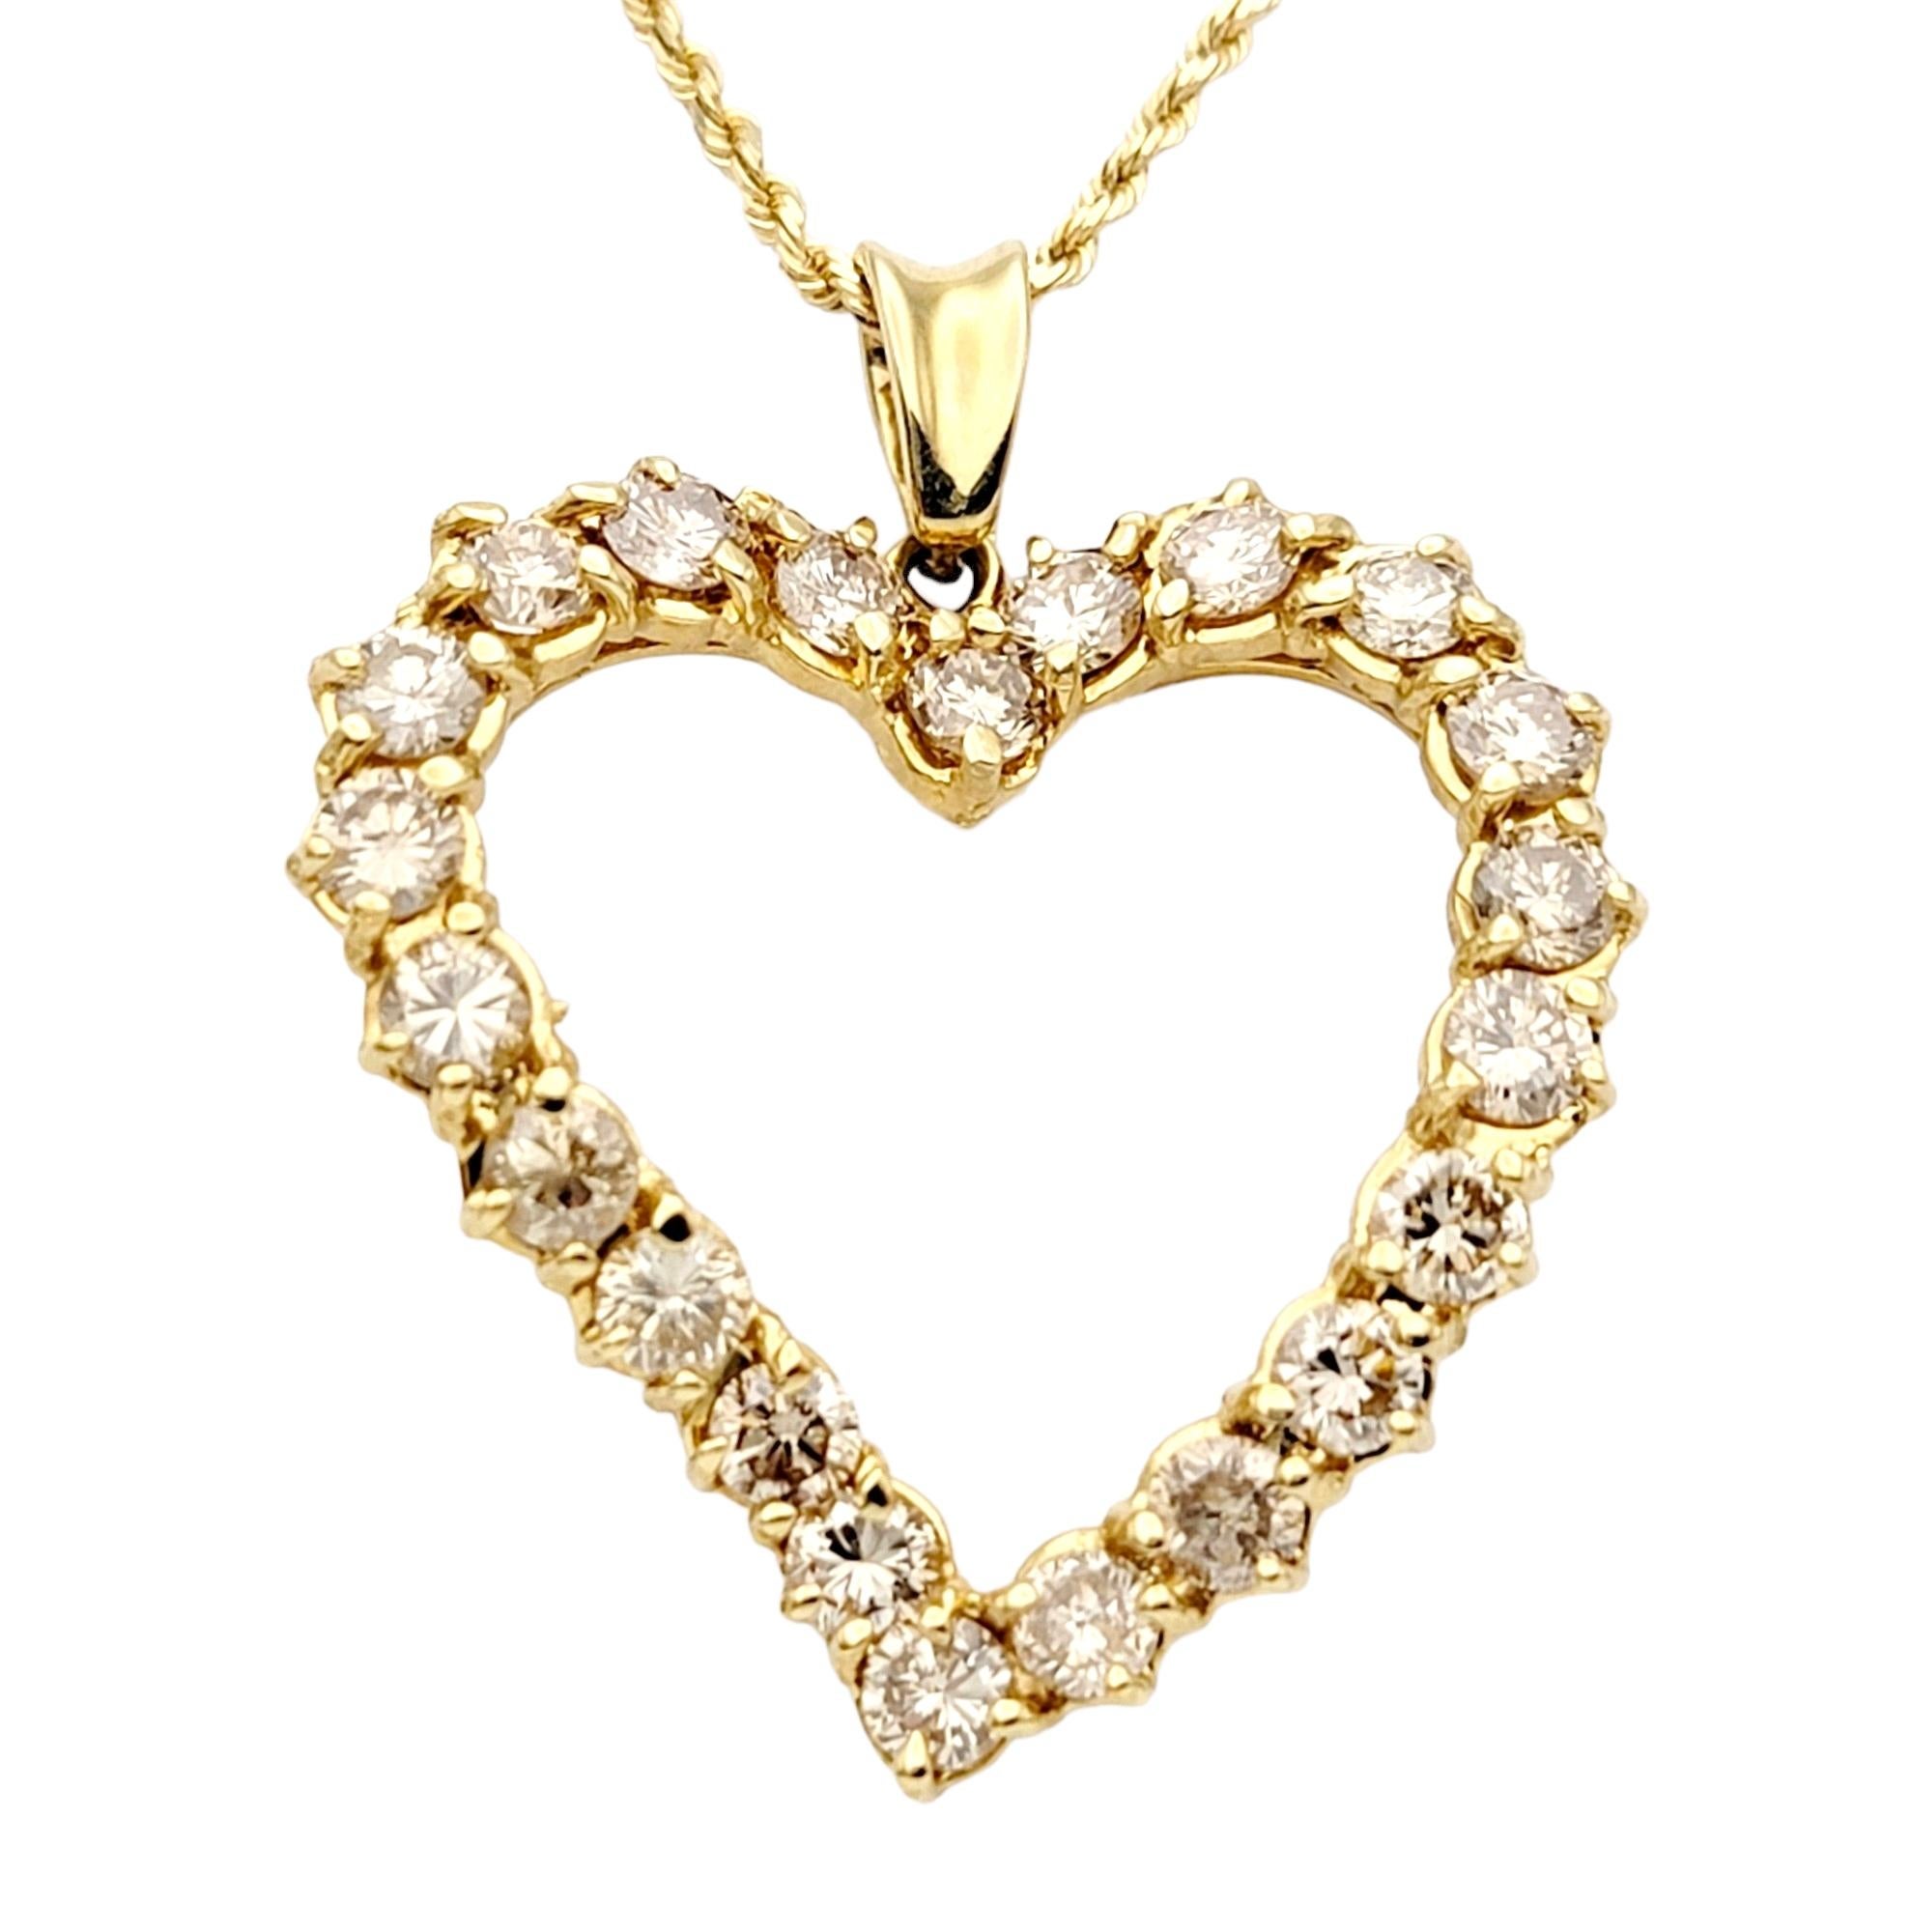 Contemporary 4.25 Carats Champagne Diamond Curved Open Heart Pendant in 14 Karat Yellow Gold